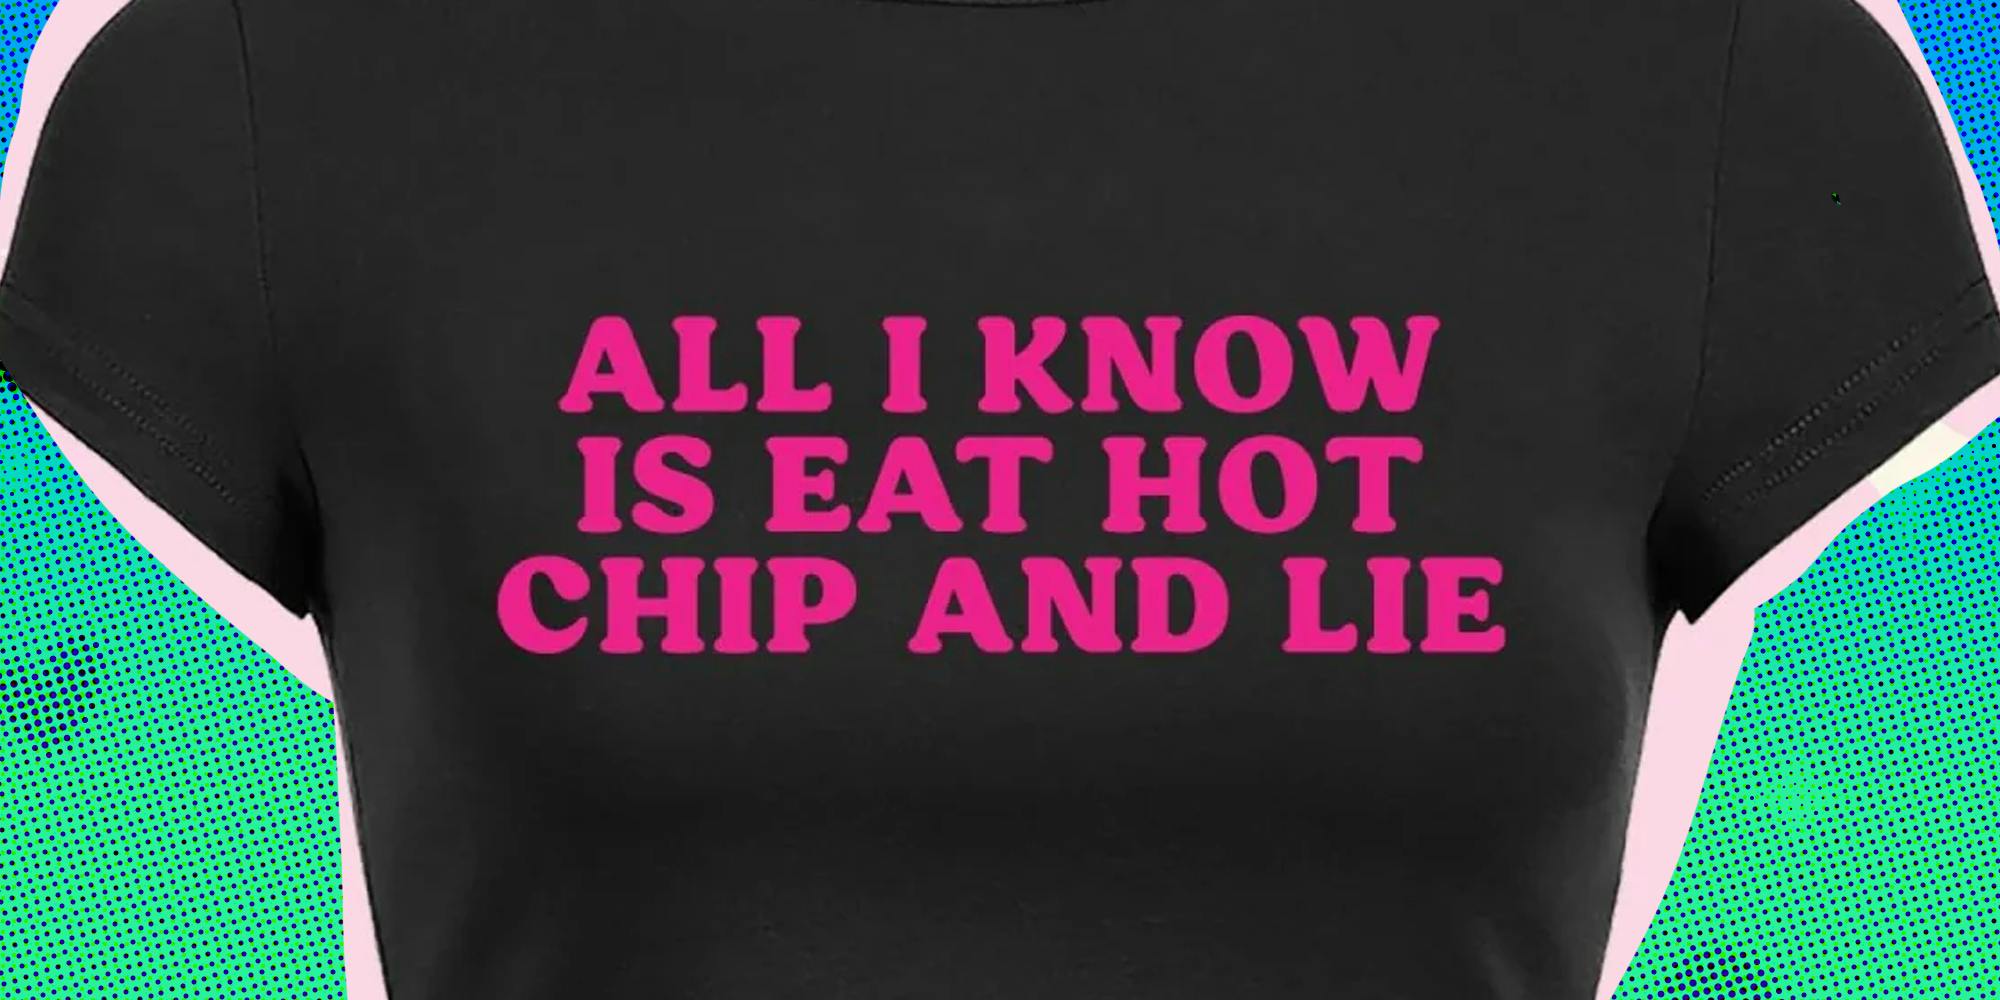 t shirt that says "all i know is eat hot chip and lie"